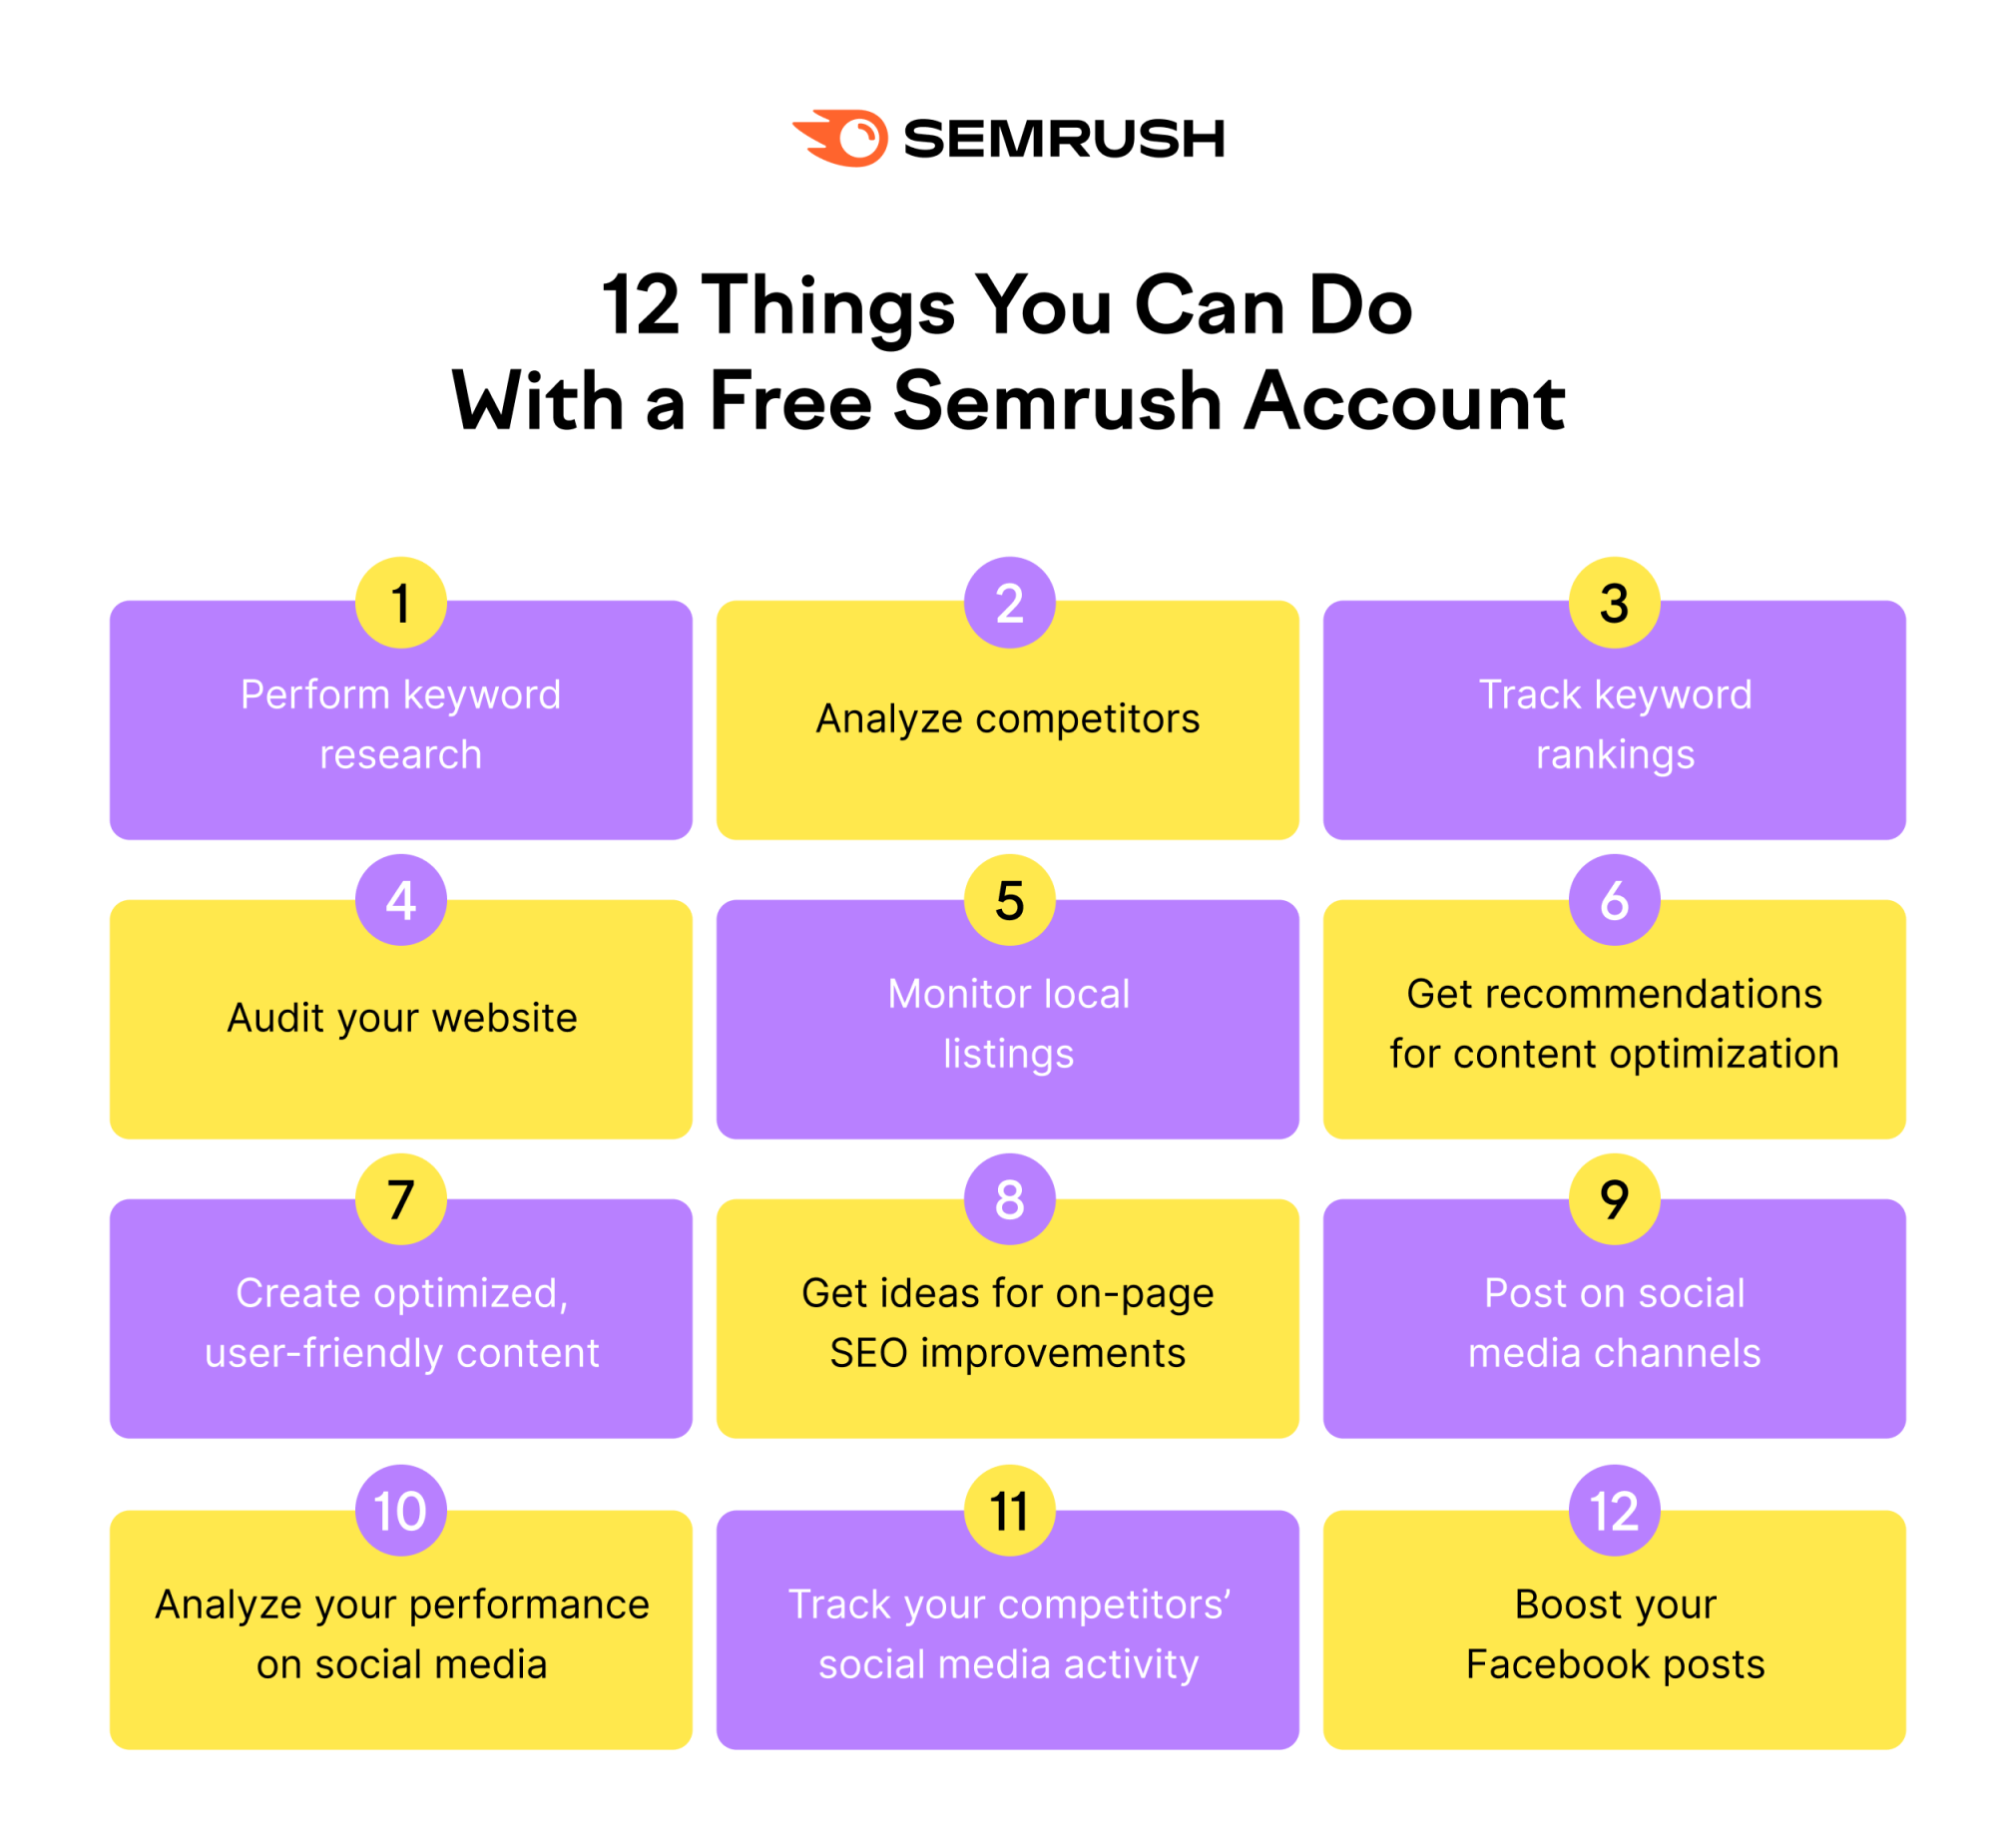 12 things you can do with a free semrush account